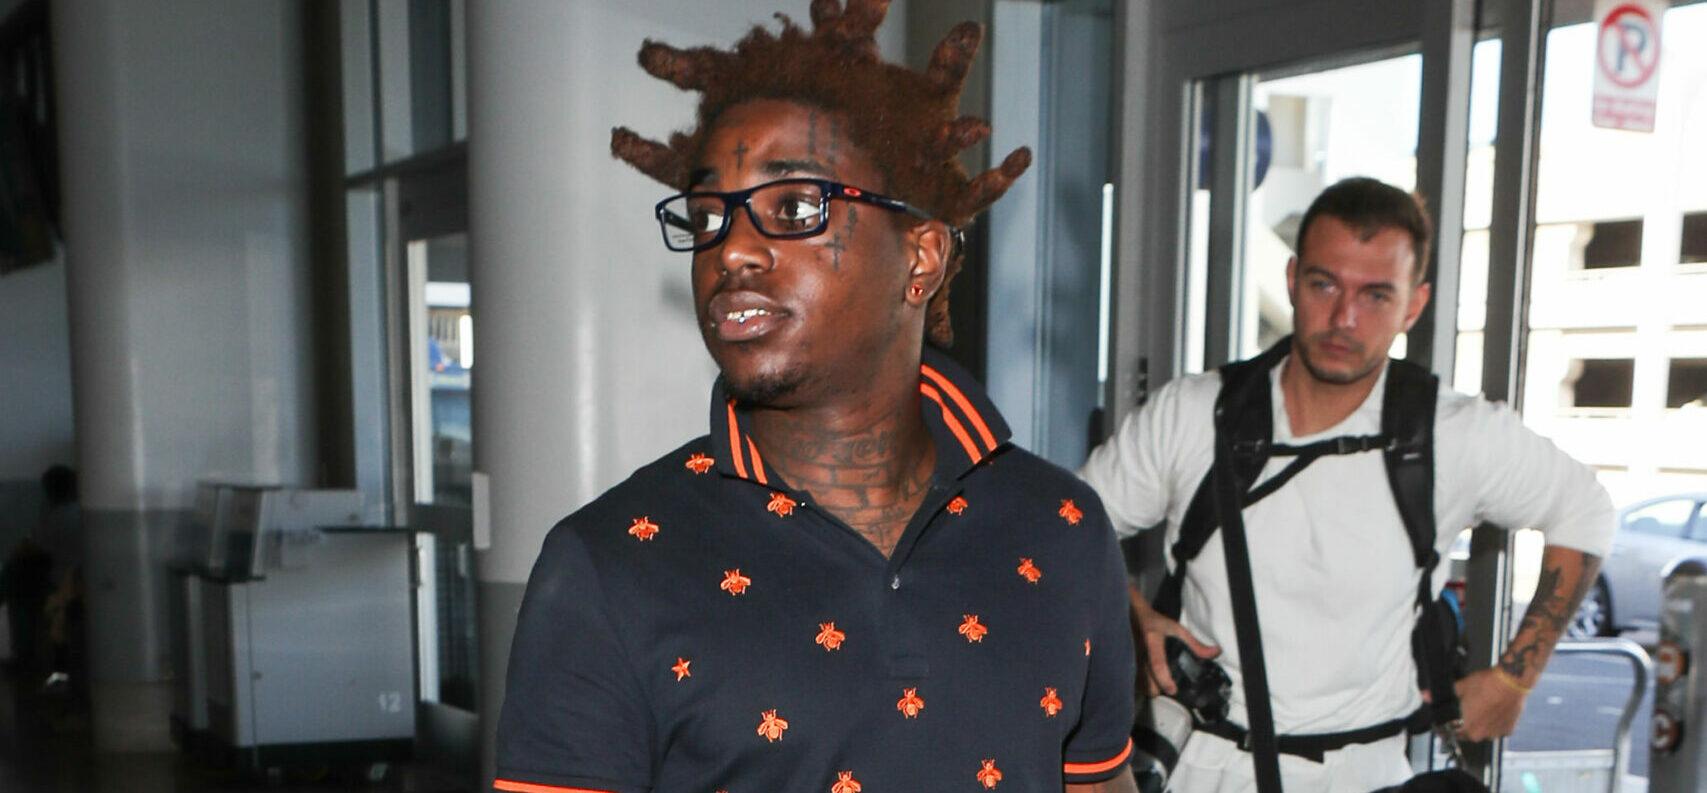 Kodak Black’s Oxycodone Drug Possession Charges Officially Dismissed